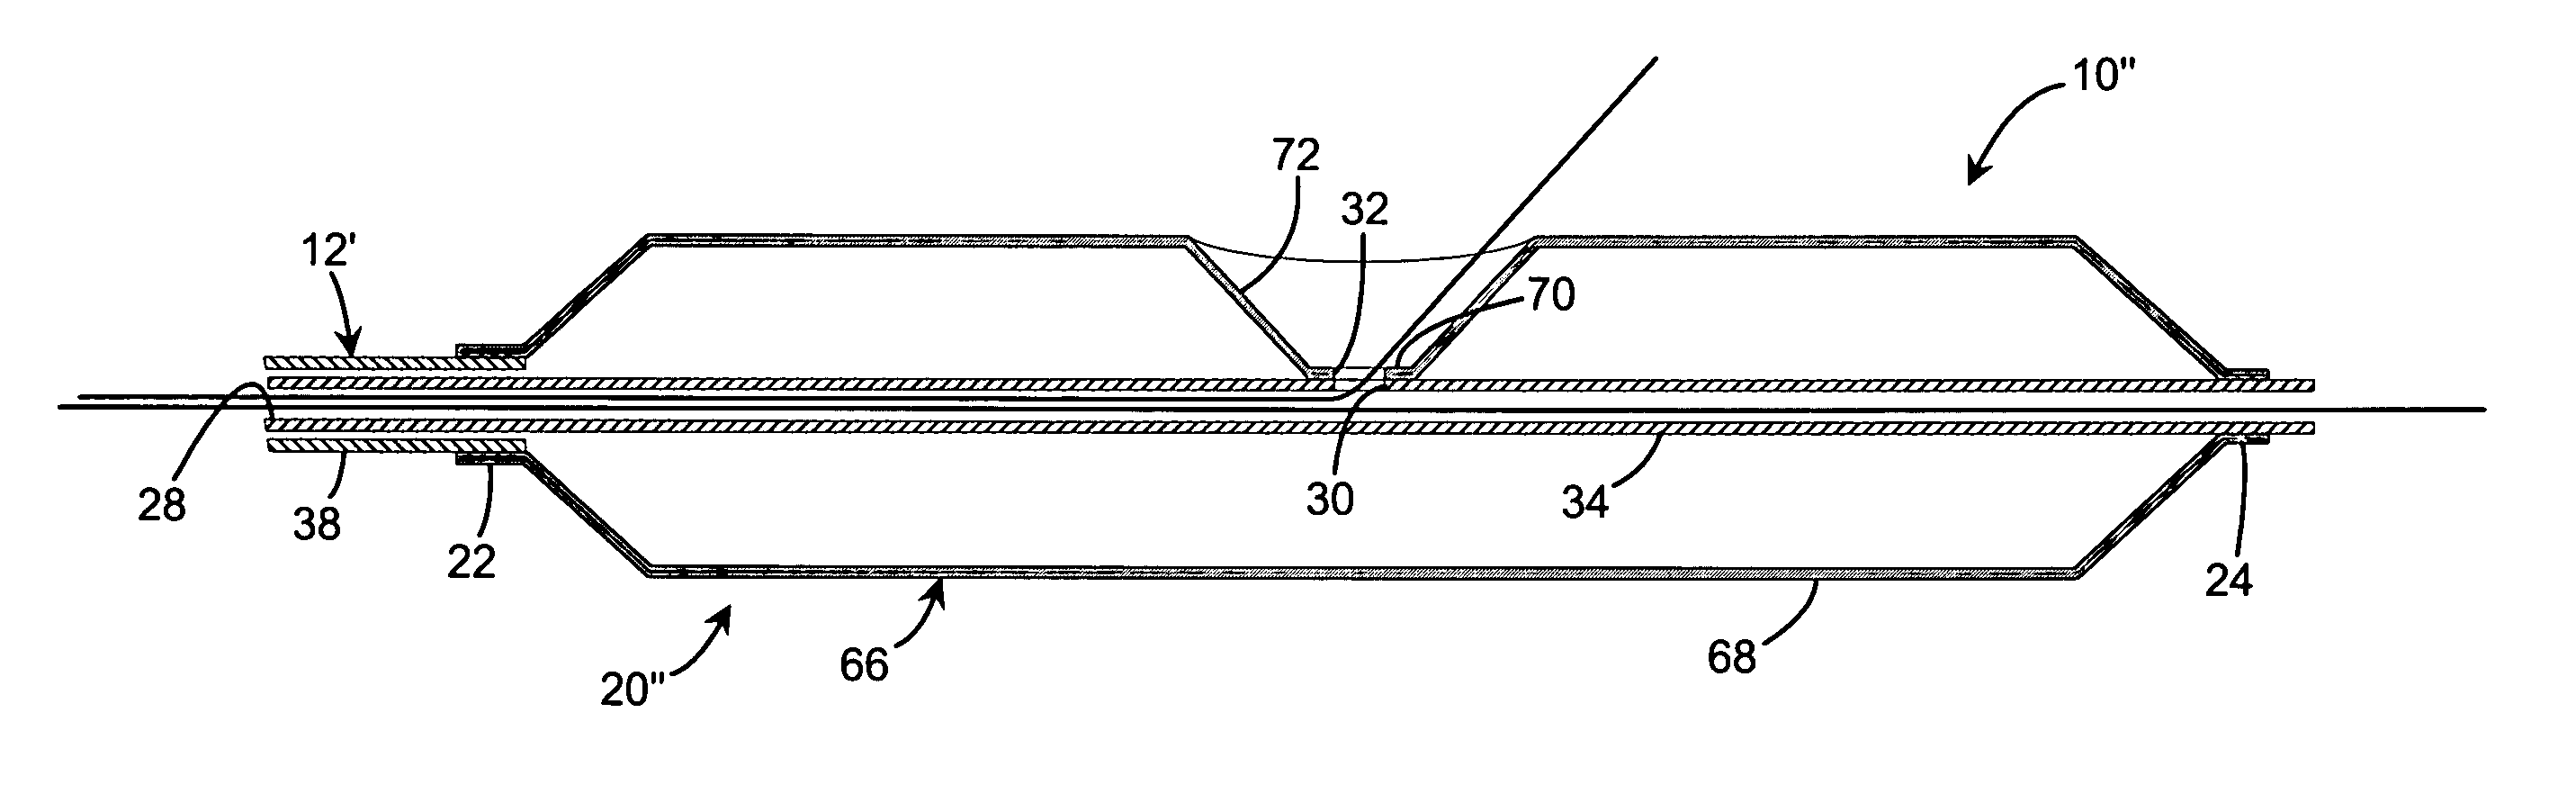 Apparatus and method for stenting bifurcation lesions